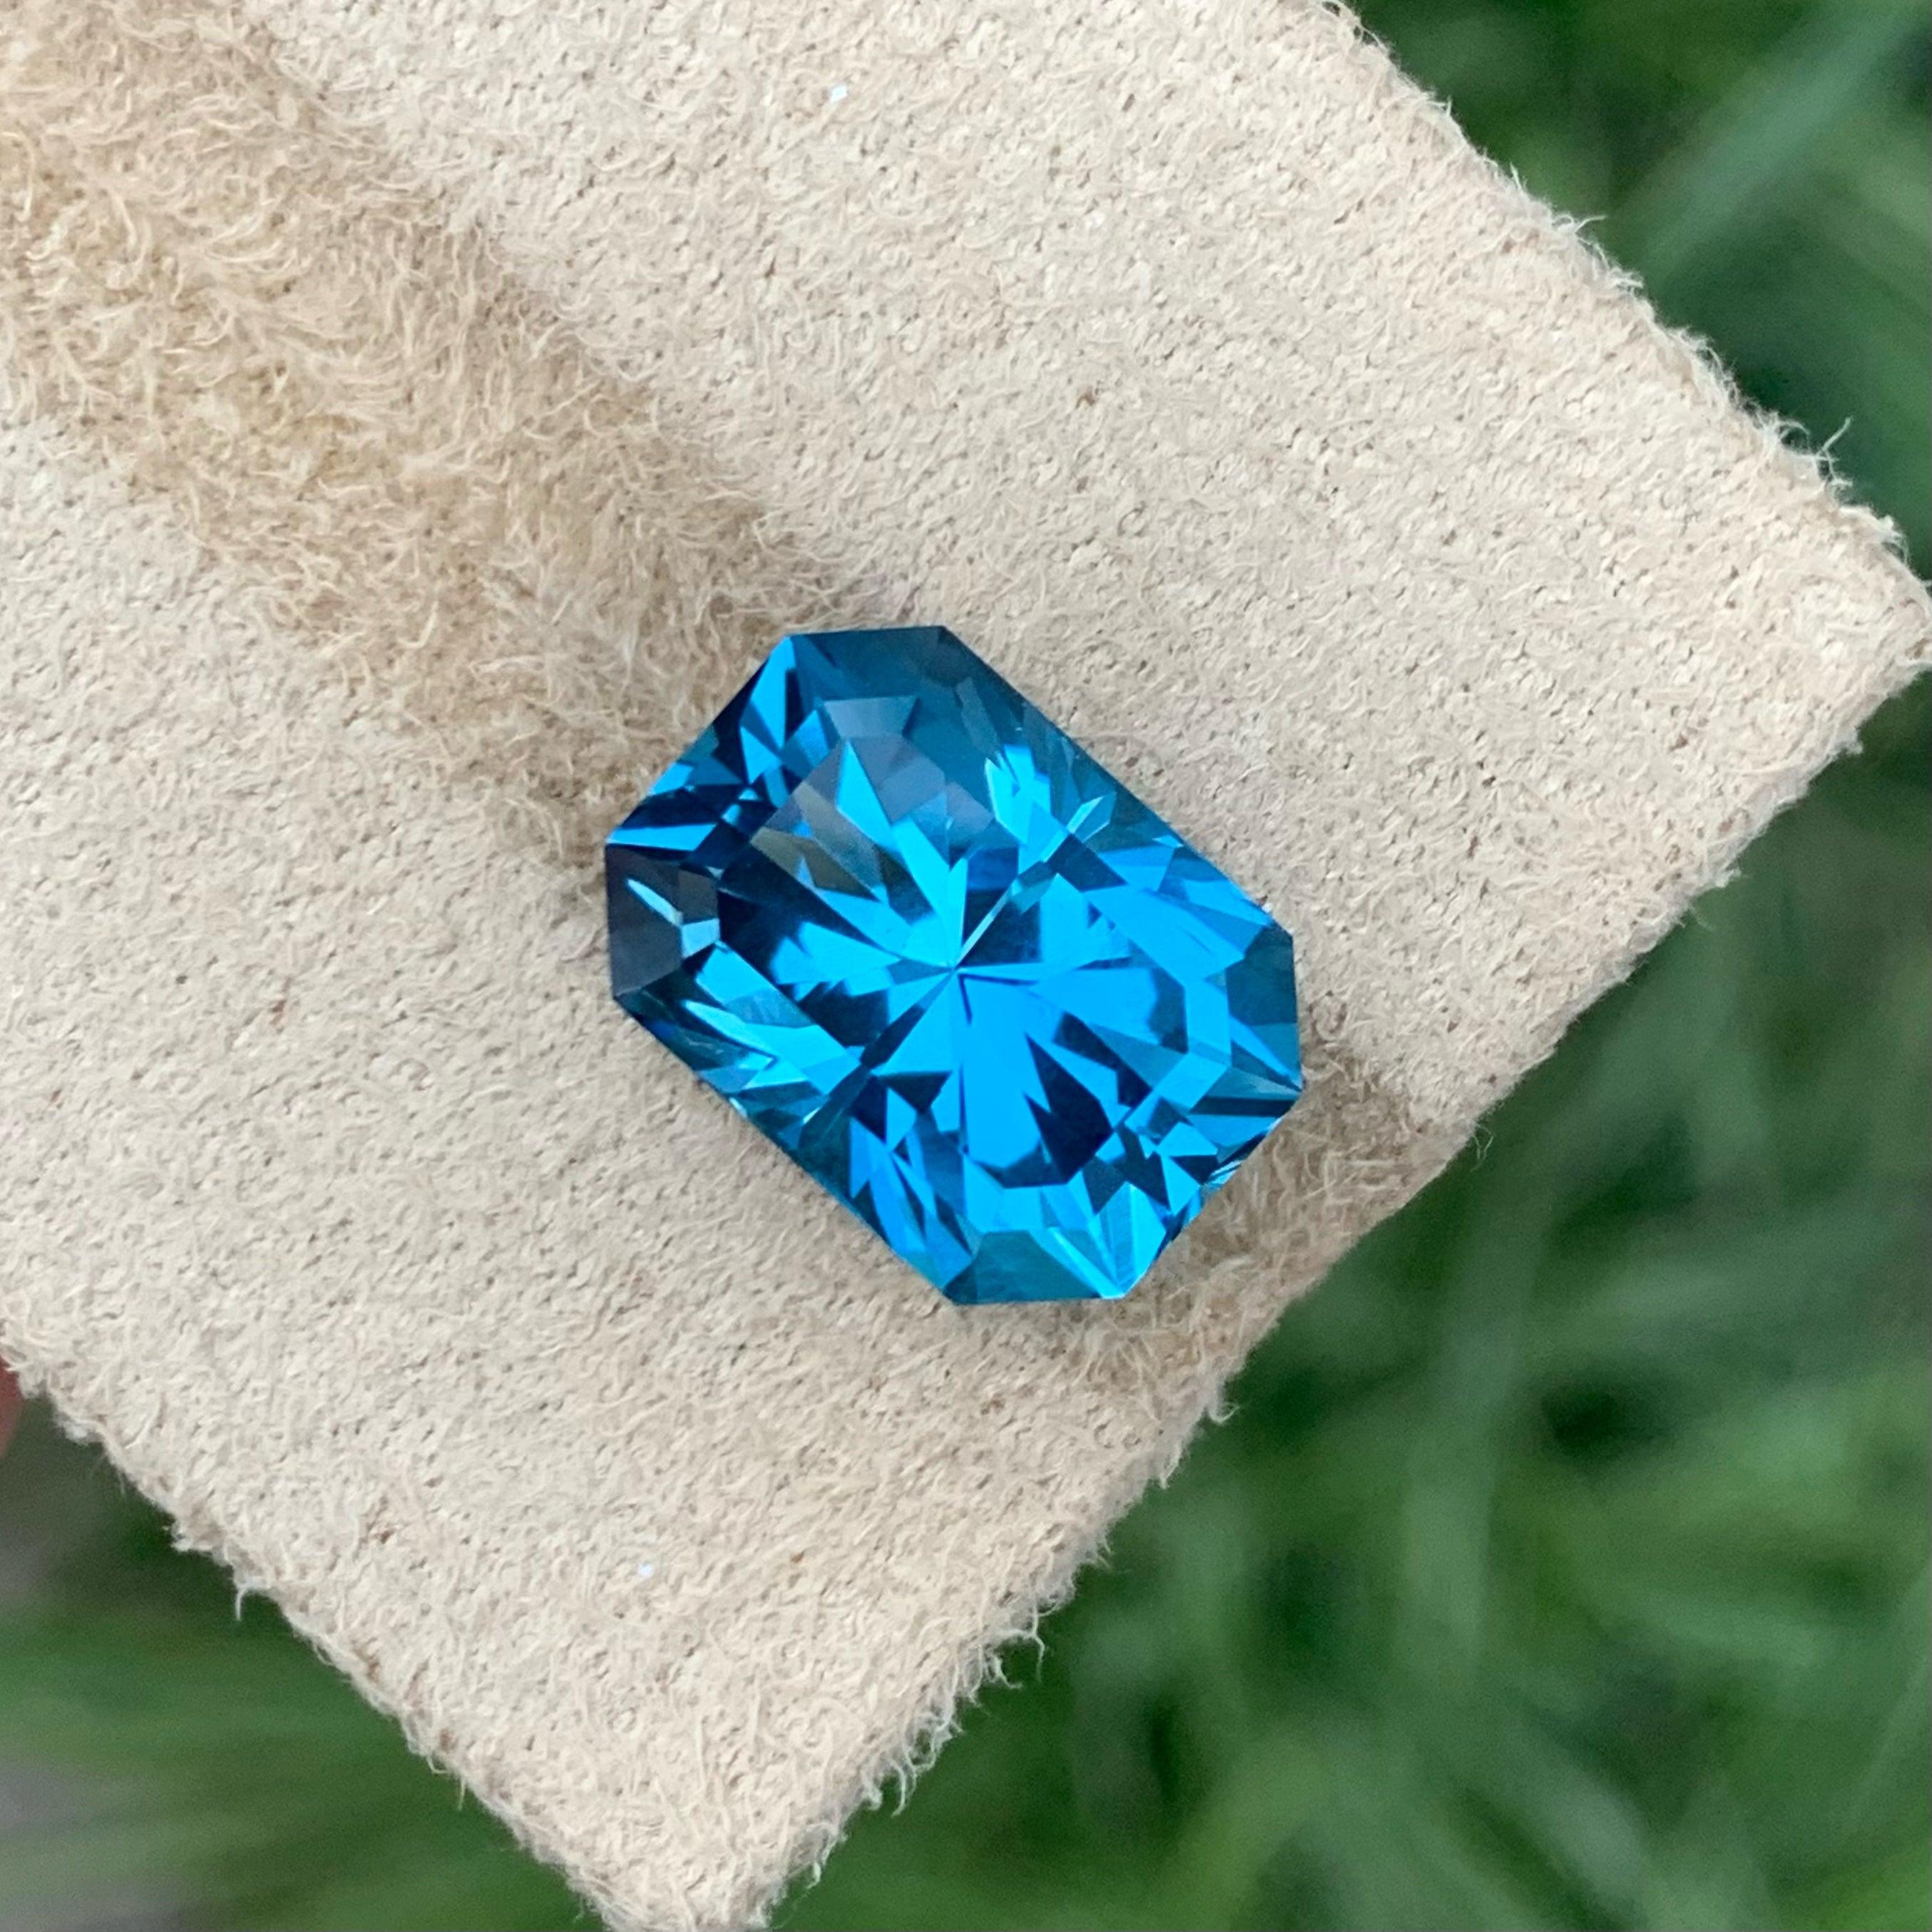 Exquisite London Blue Topaz Gemstone, available For Sale At Wholesale Price Natural High Quality 12.10 Carats Loupe Clean Clarity Natural Loose Topaz From Africa. 
Product Information:
GEMSTONE NAME: Exquisite London Blue Topaz